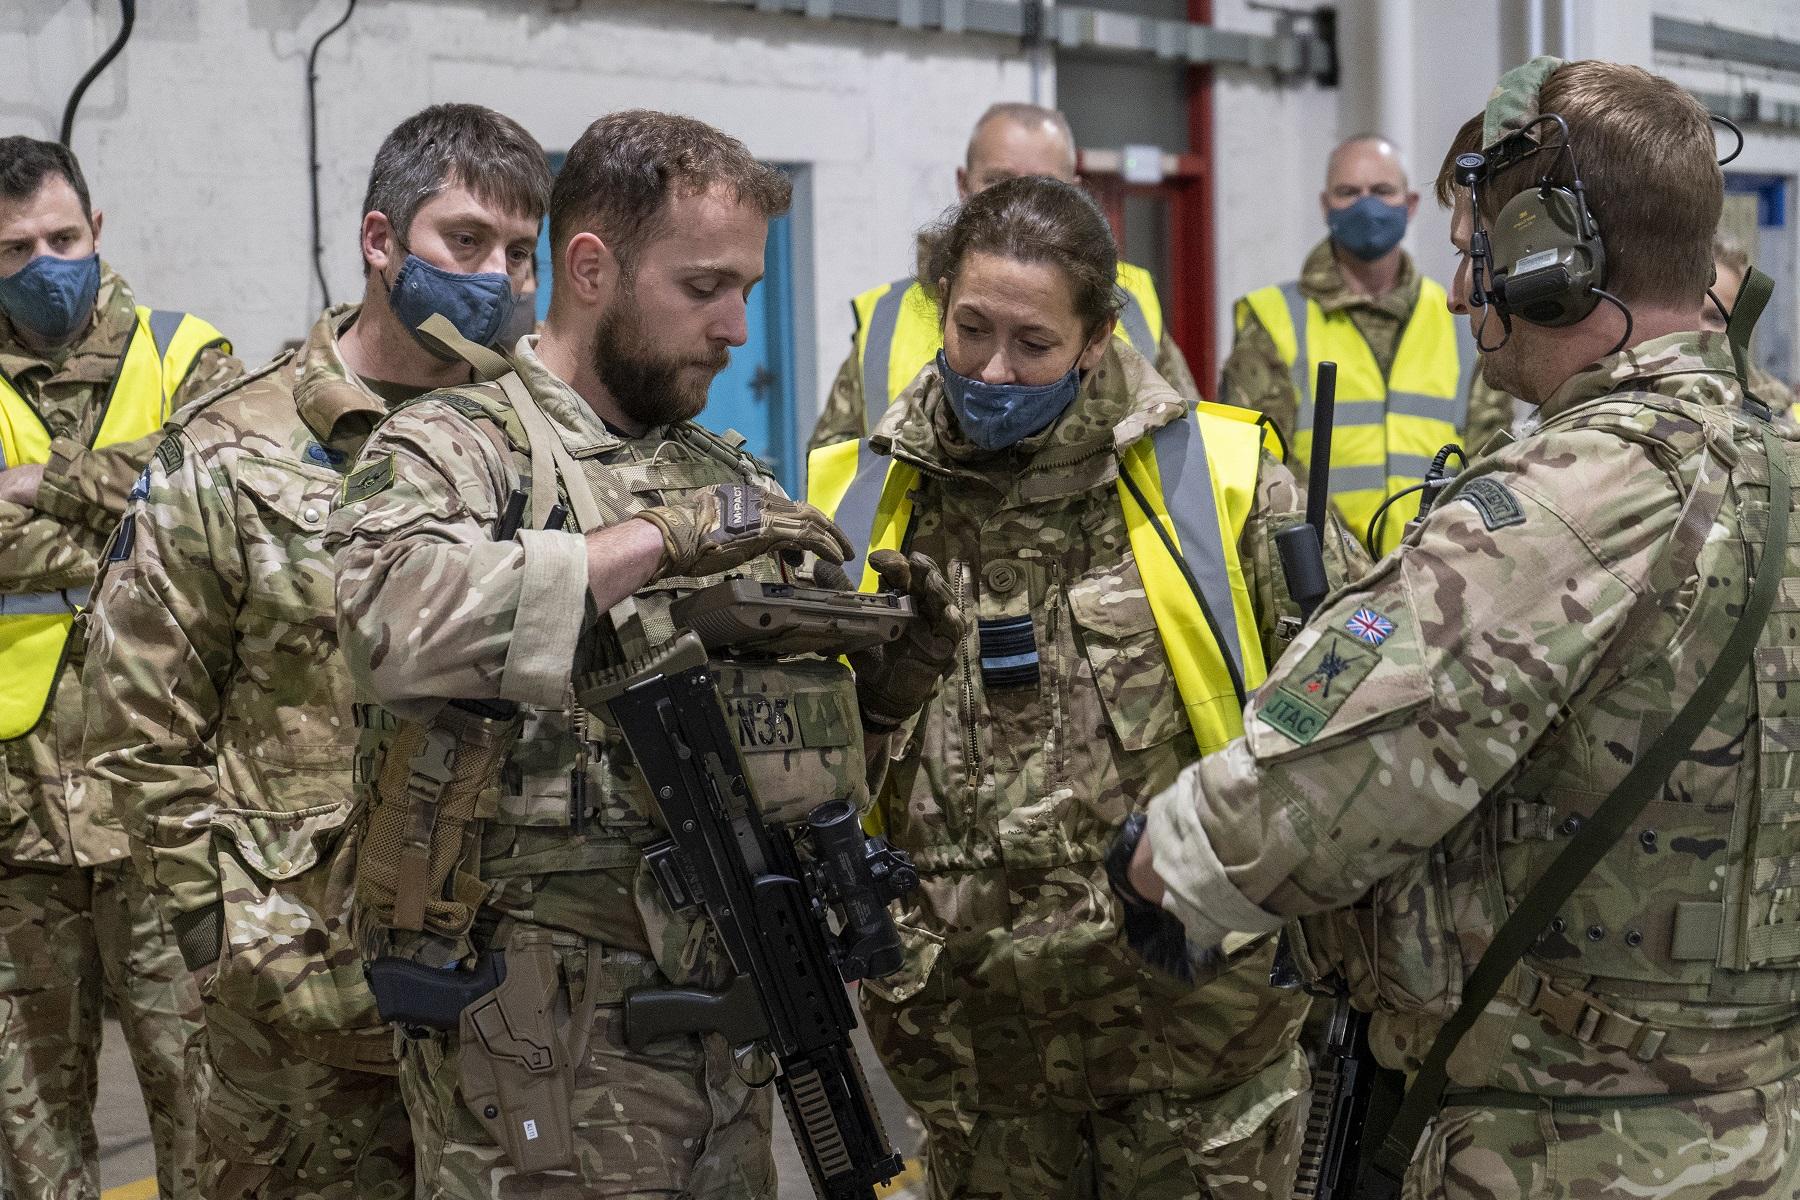 Personnel from 34 Squadron RAF Regiment and other security specialists also deployed to provide an enclave protection and counter-intruder capability. 